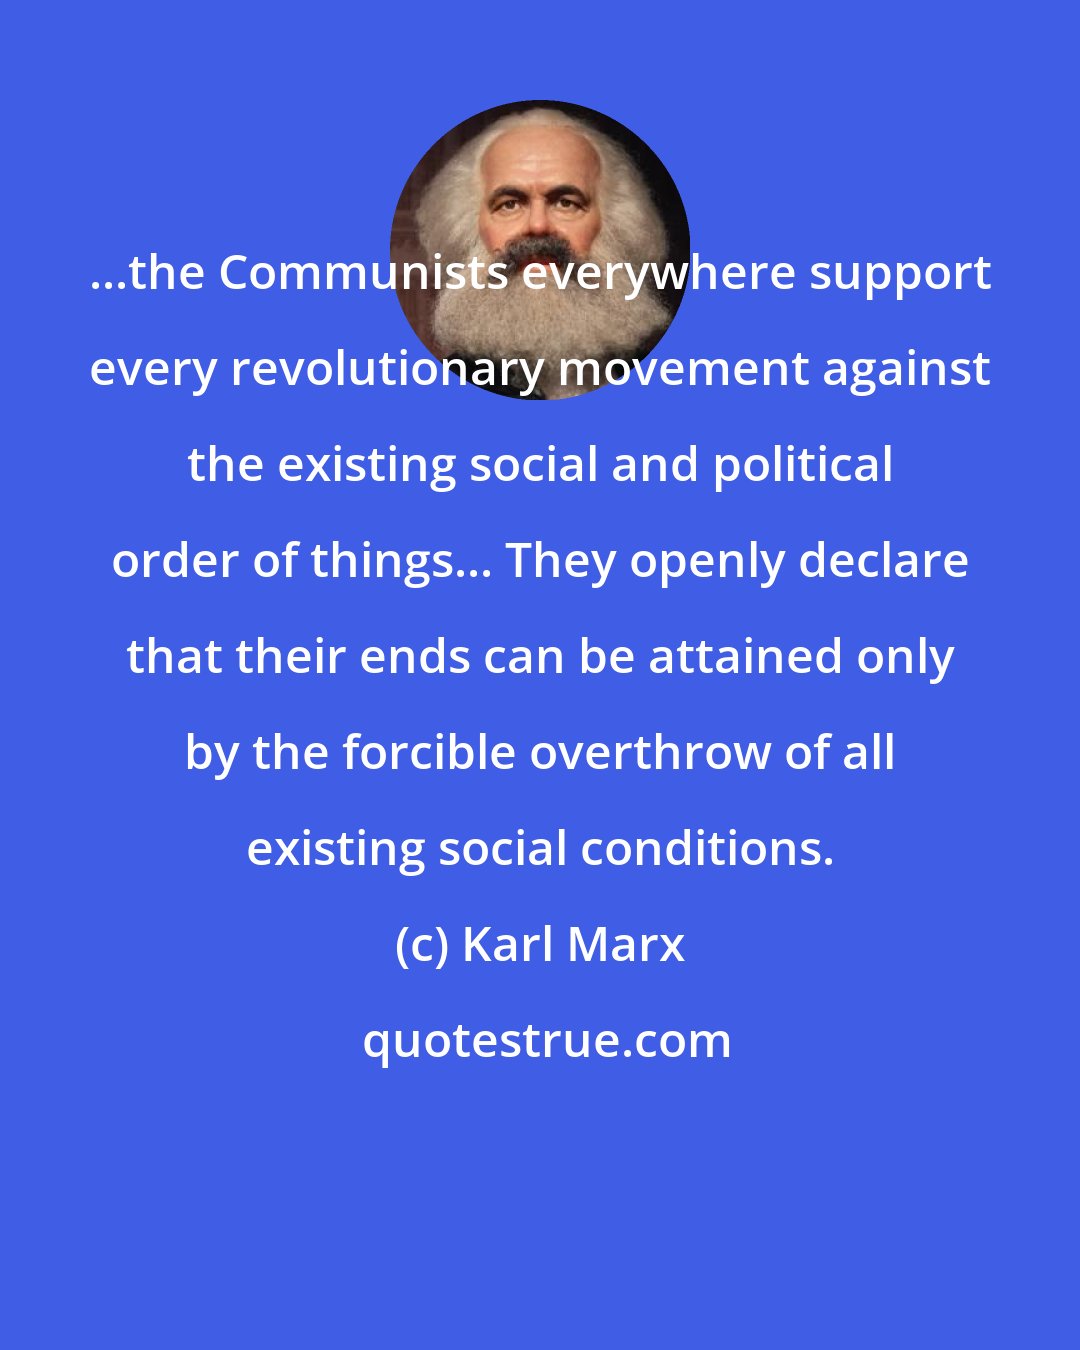 Karl Marx: ...the Communists everywhere support every revolutionary movement against the existing social and political order of things... They openly declare that their ends can be attained only by the forcible overthrow of all existing social conditions.